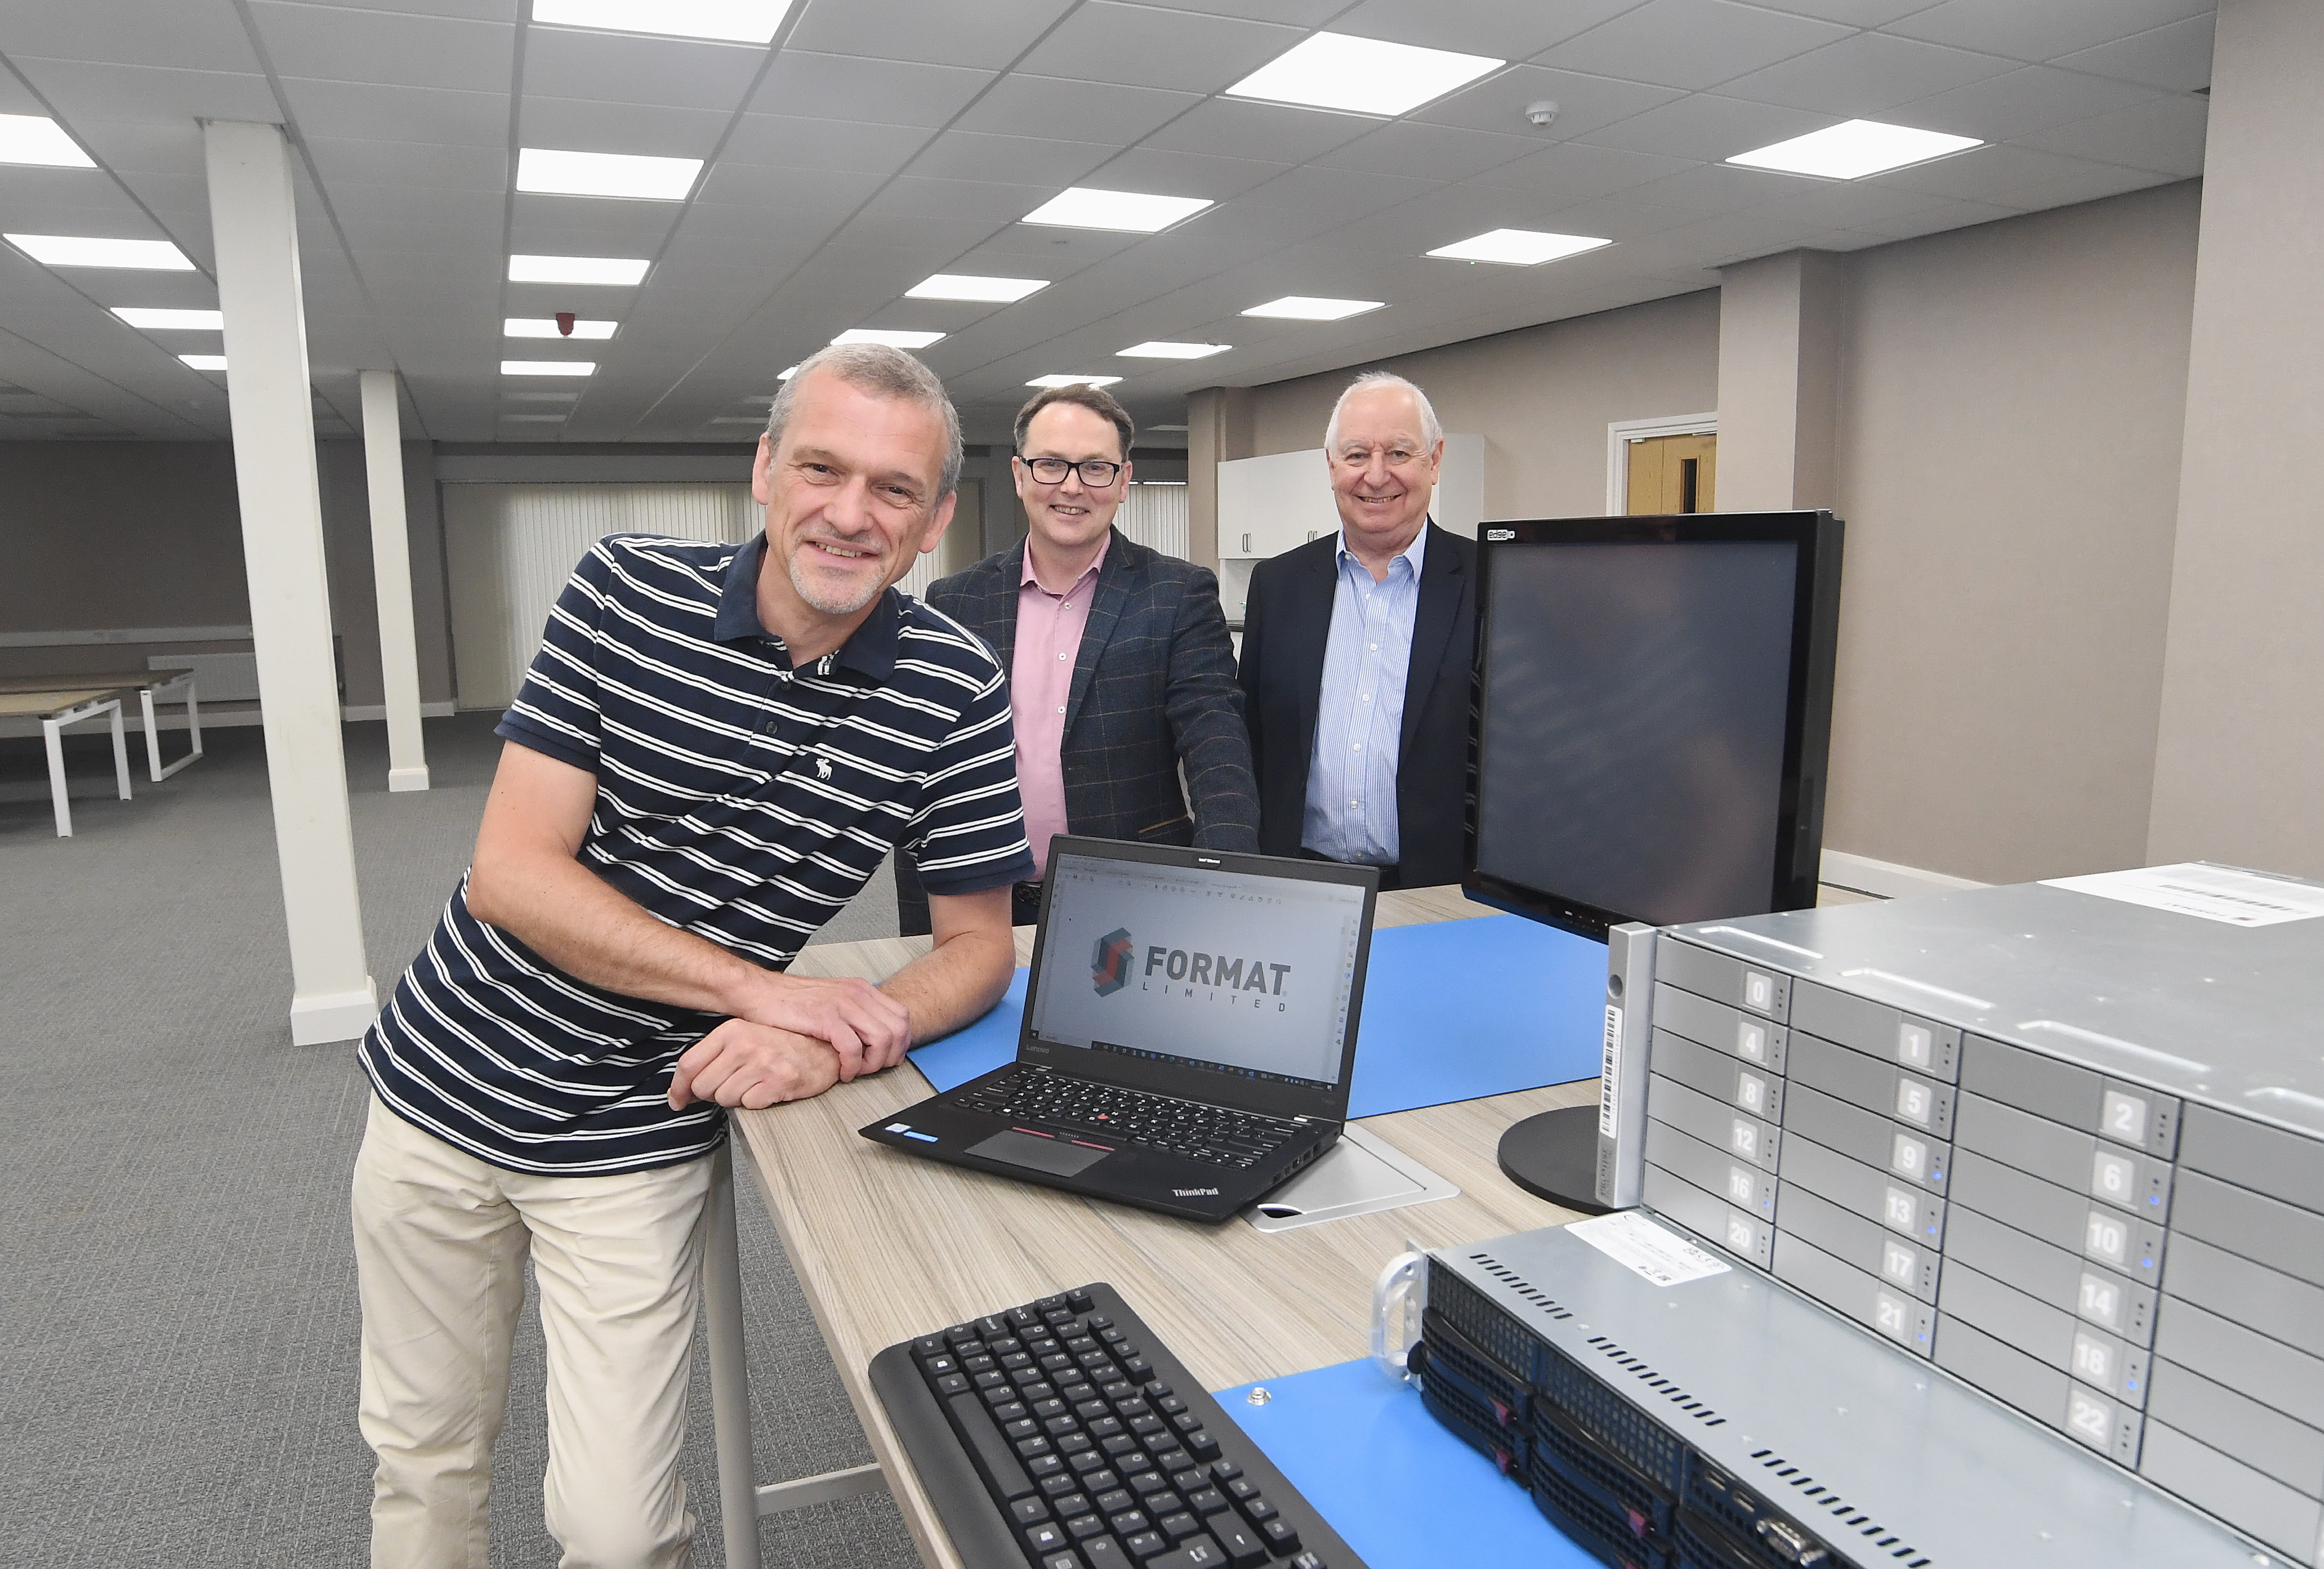 Supplier of computer servers for world-famous scientific experiment moves to Coventry in expansion drive